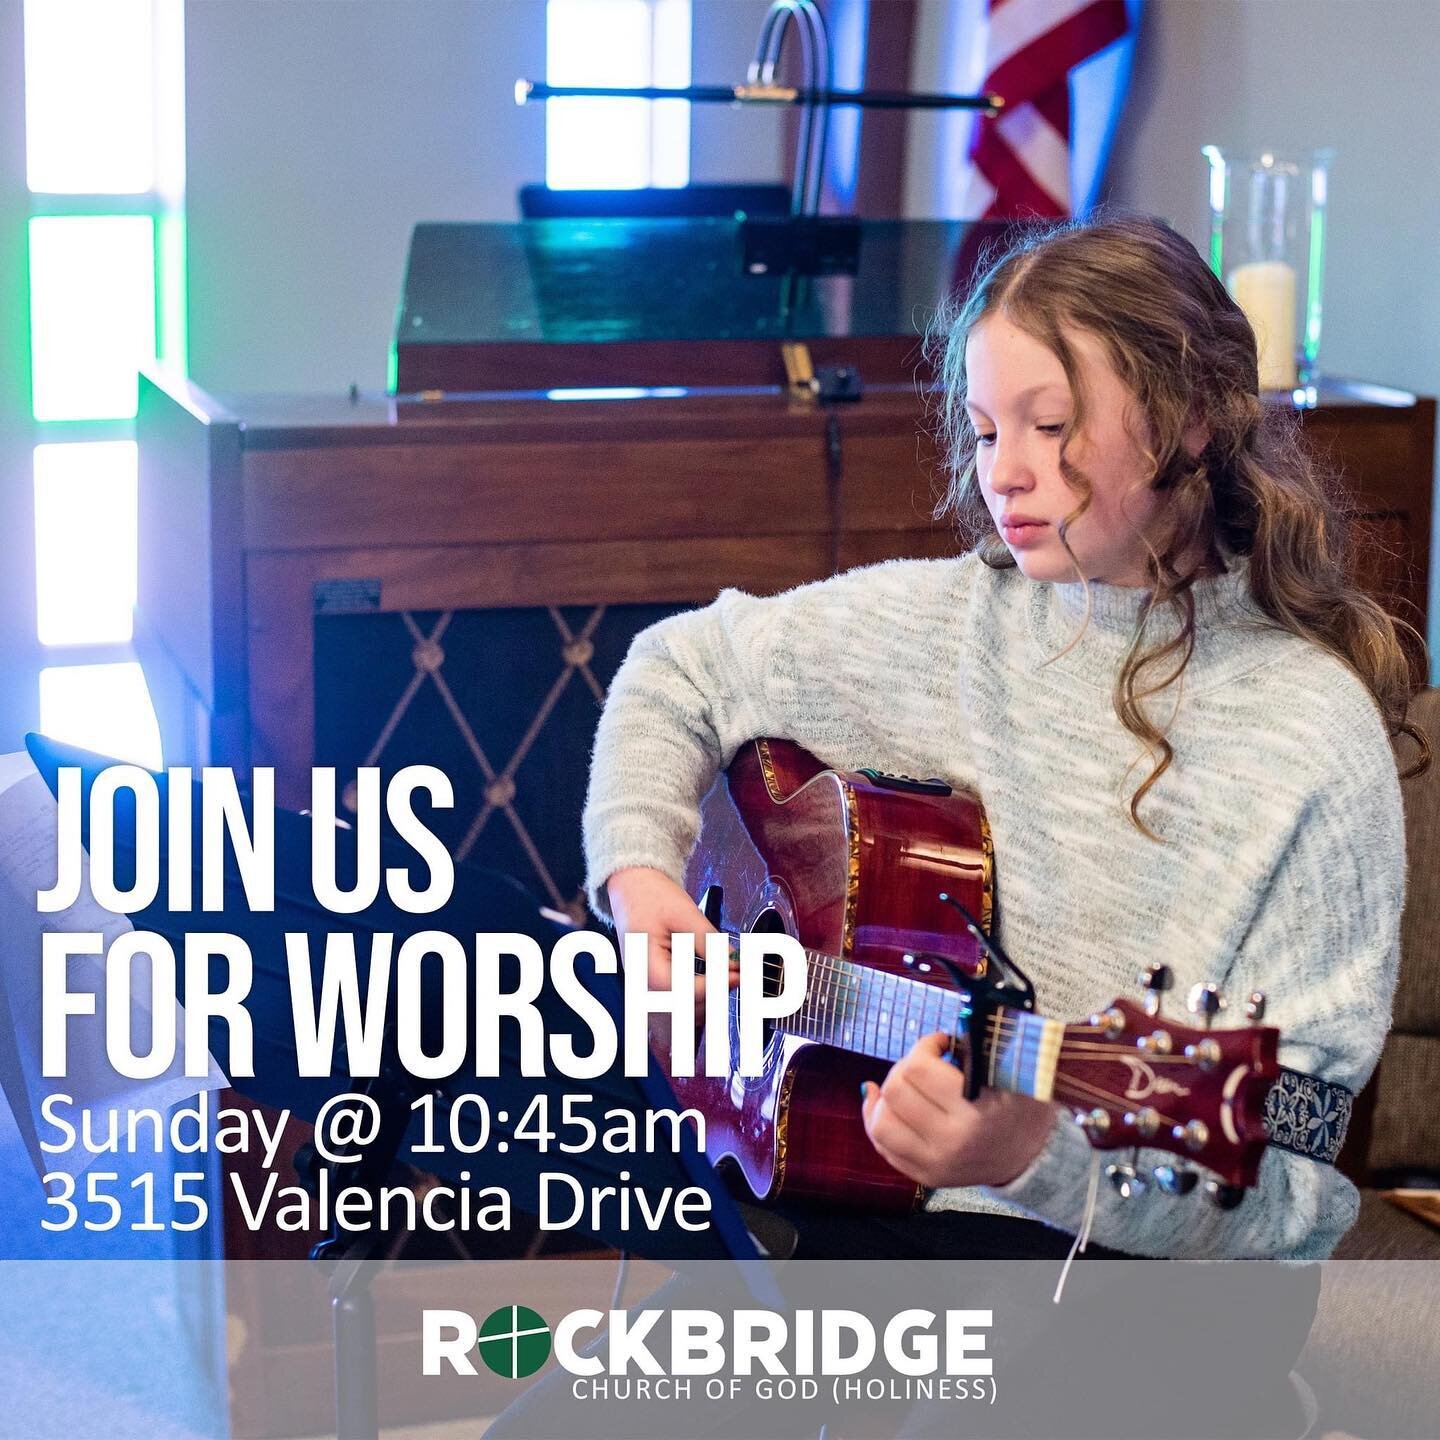 Join us tomorrow at 10:45am for worship.  Nathan Billington is bringing the message.  See you there! #church #columbiamochurch #rockbridgechurch #rockbridgecomo #sundaymornings